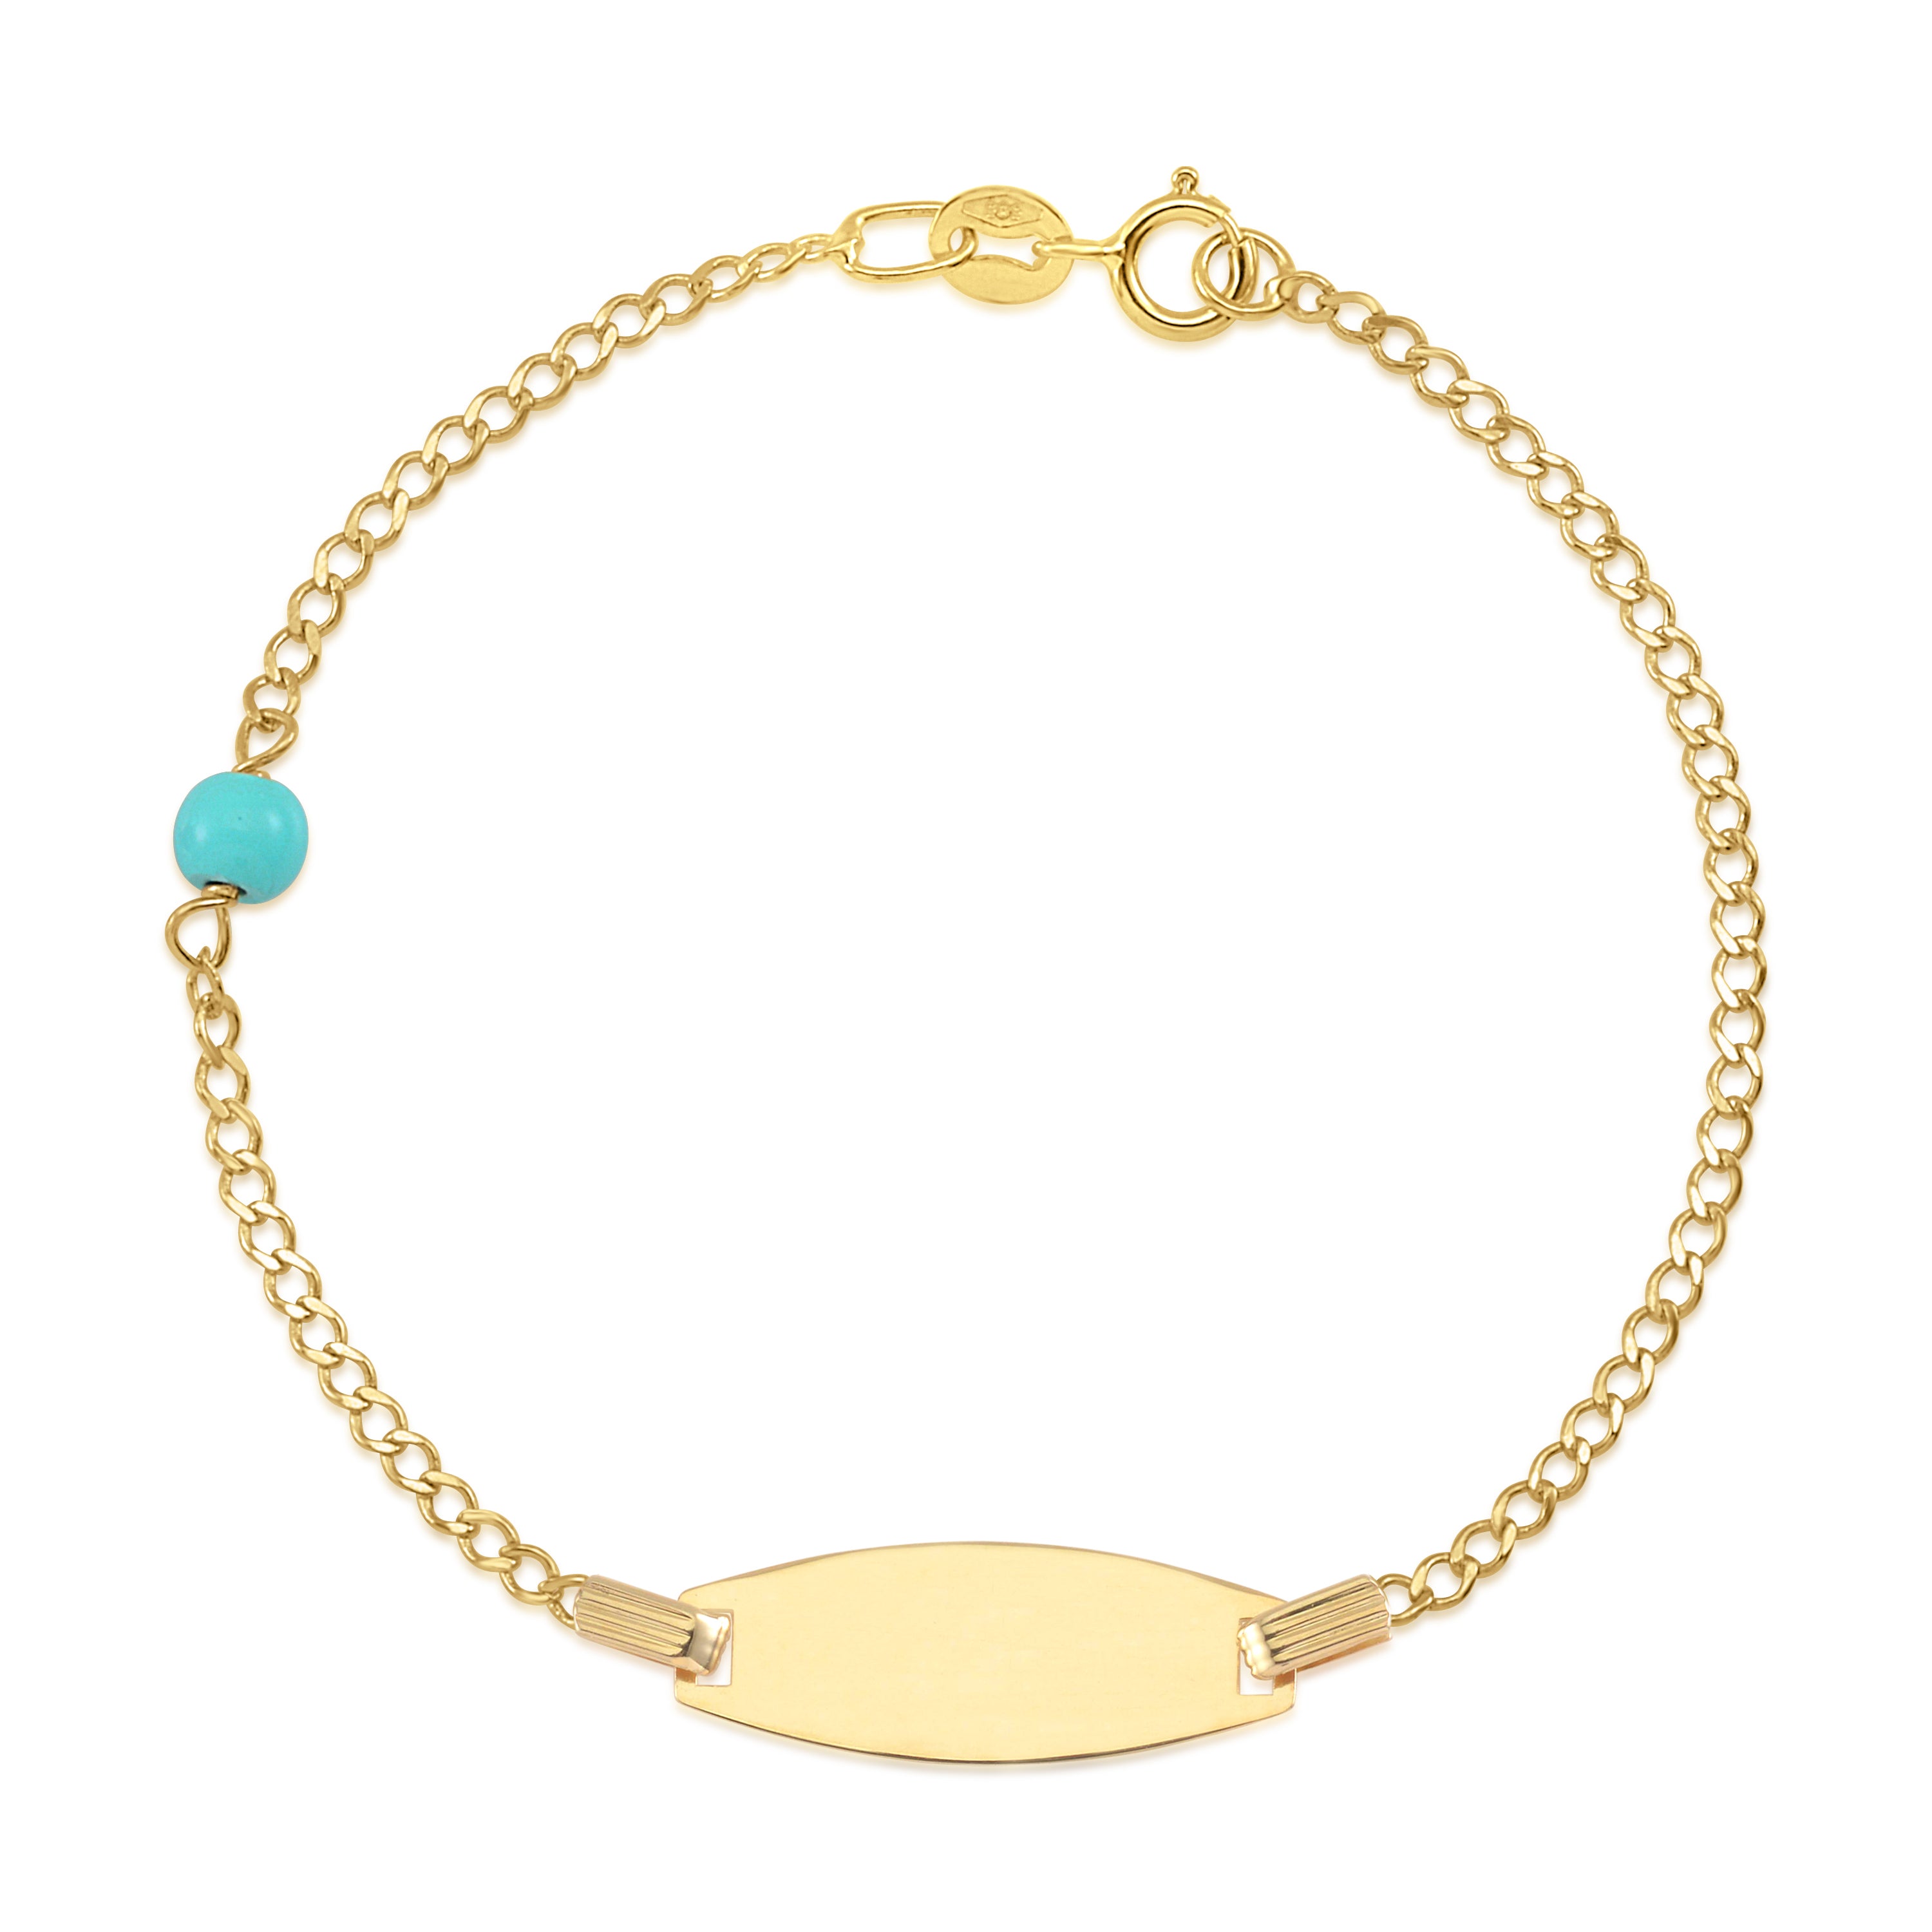 Unicornj 14K Yellow Gold ID Bracelet Boys Girls Bead Accent Curb Chain 5.5" Italy Bowed